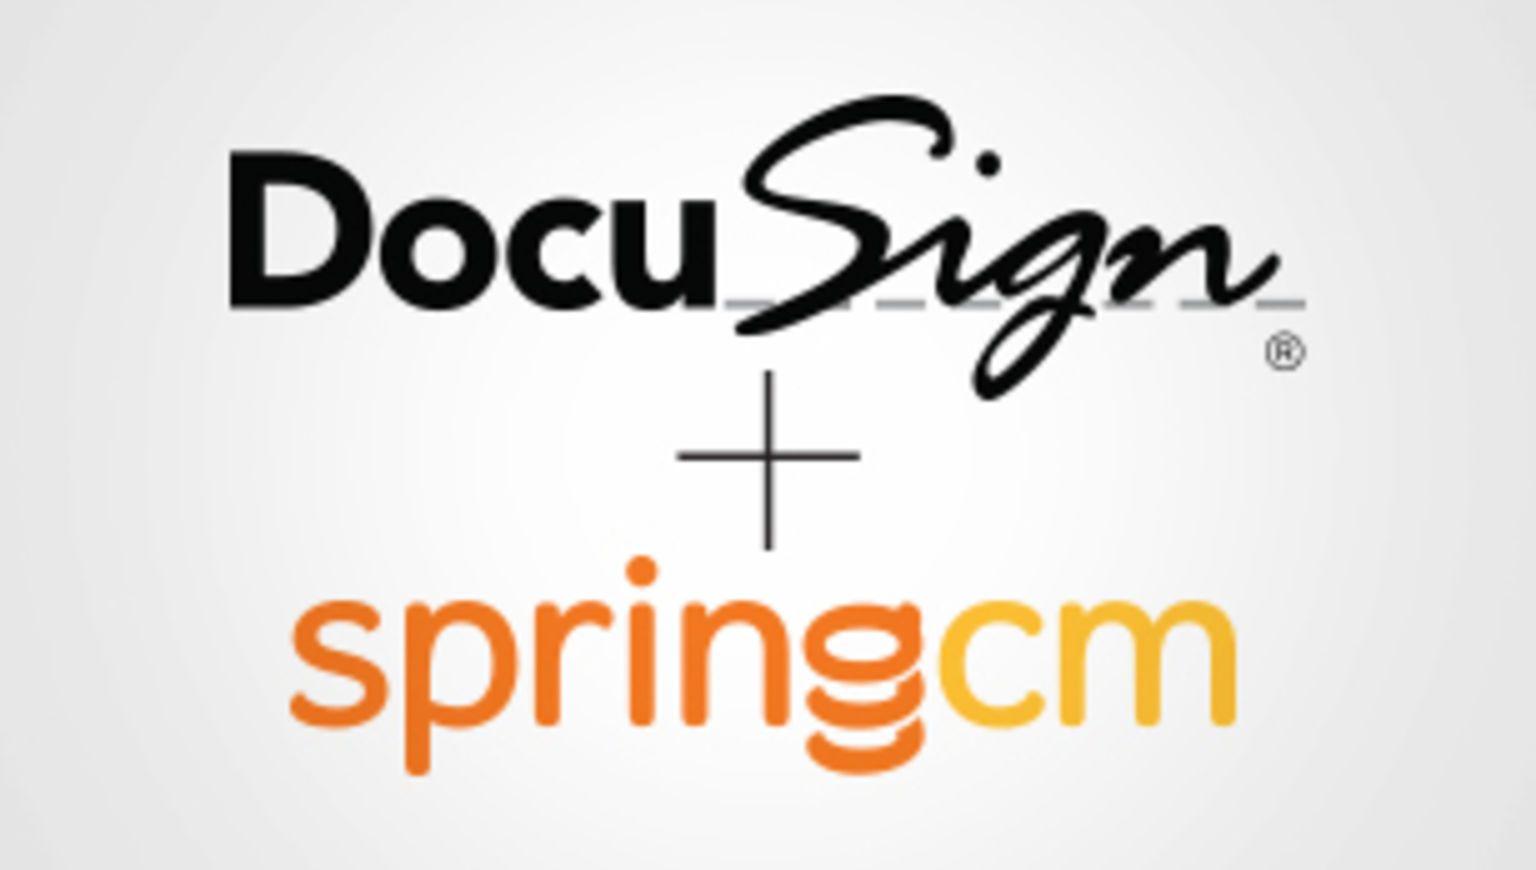 DocuSign Logo - Electronic Signature Solution Industry Leader | DocuSign